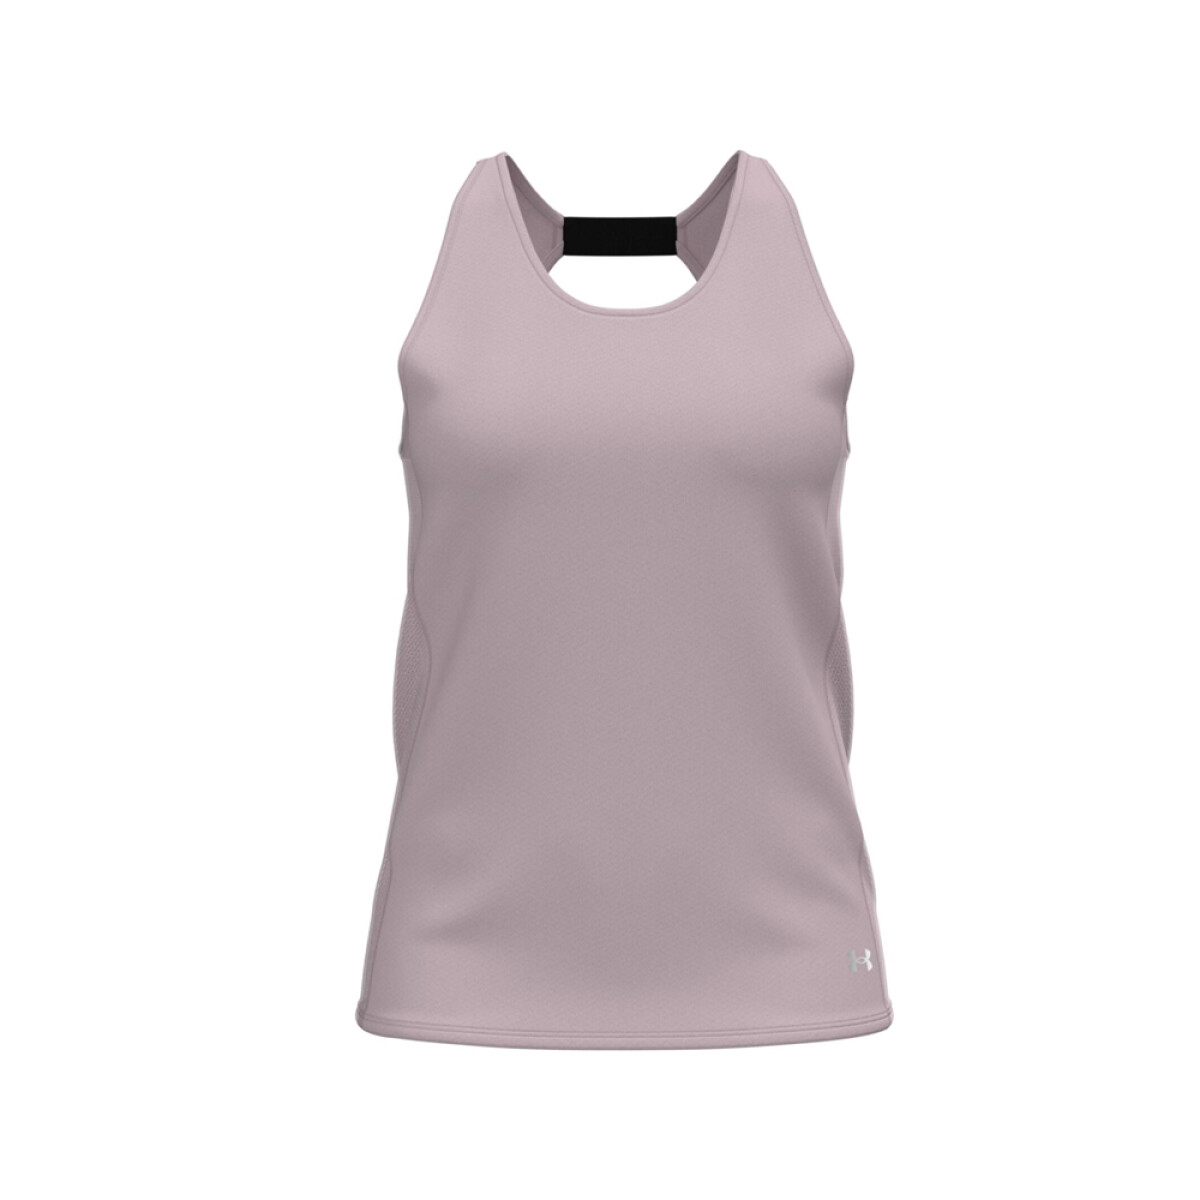 MUSCULOSA UNDER ARMOUR FLY BY TANK - Pink 